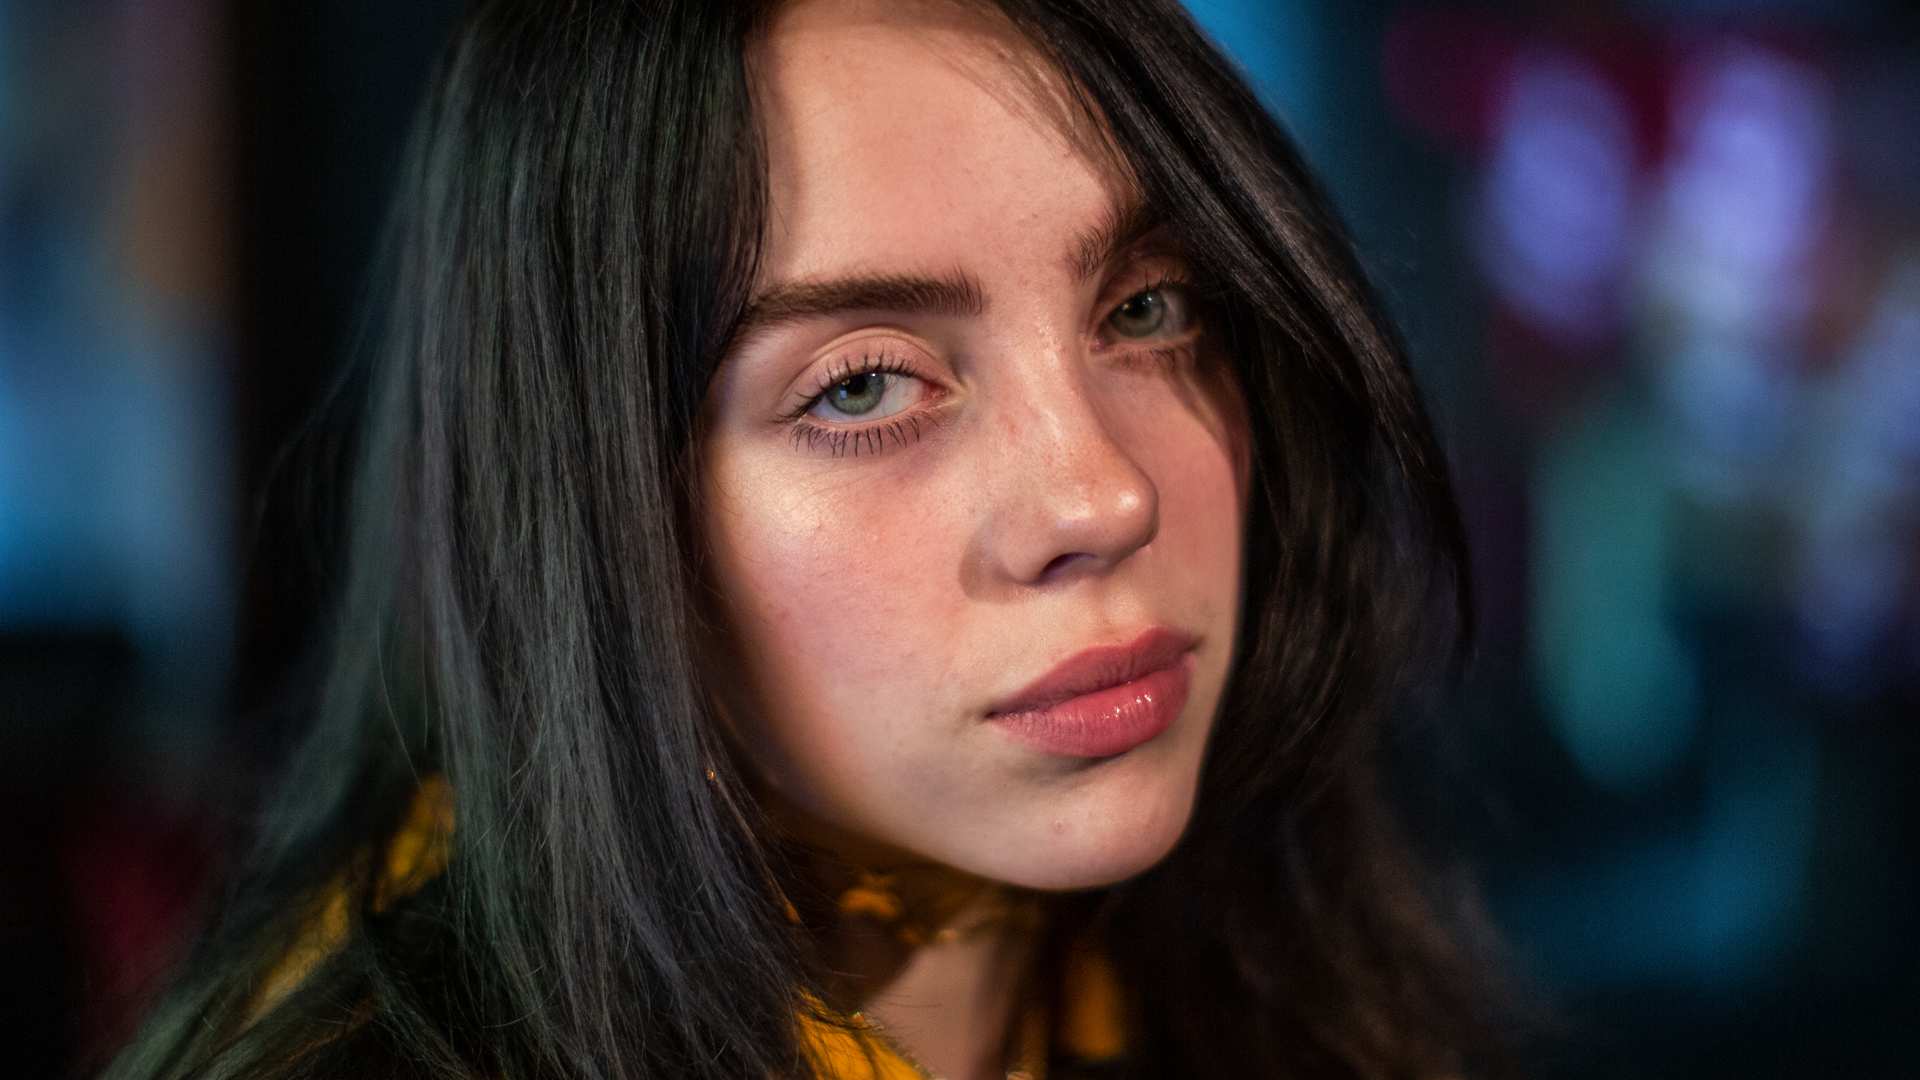 Billie Eilish answers all your questions!